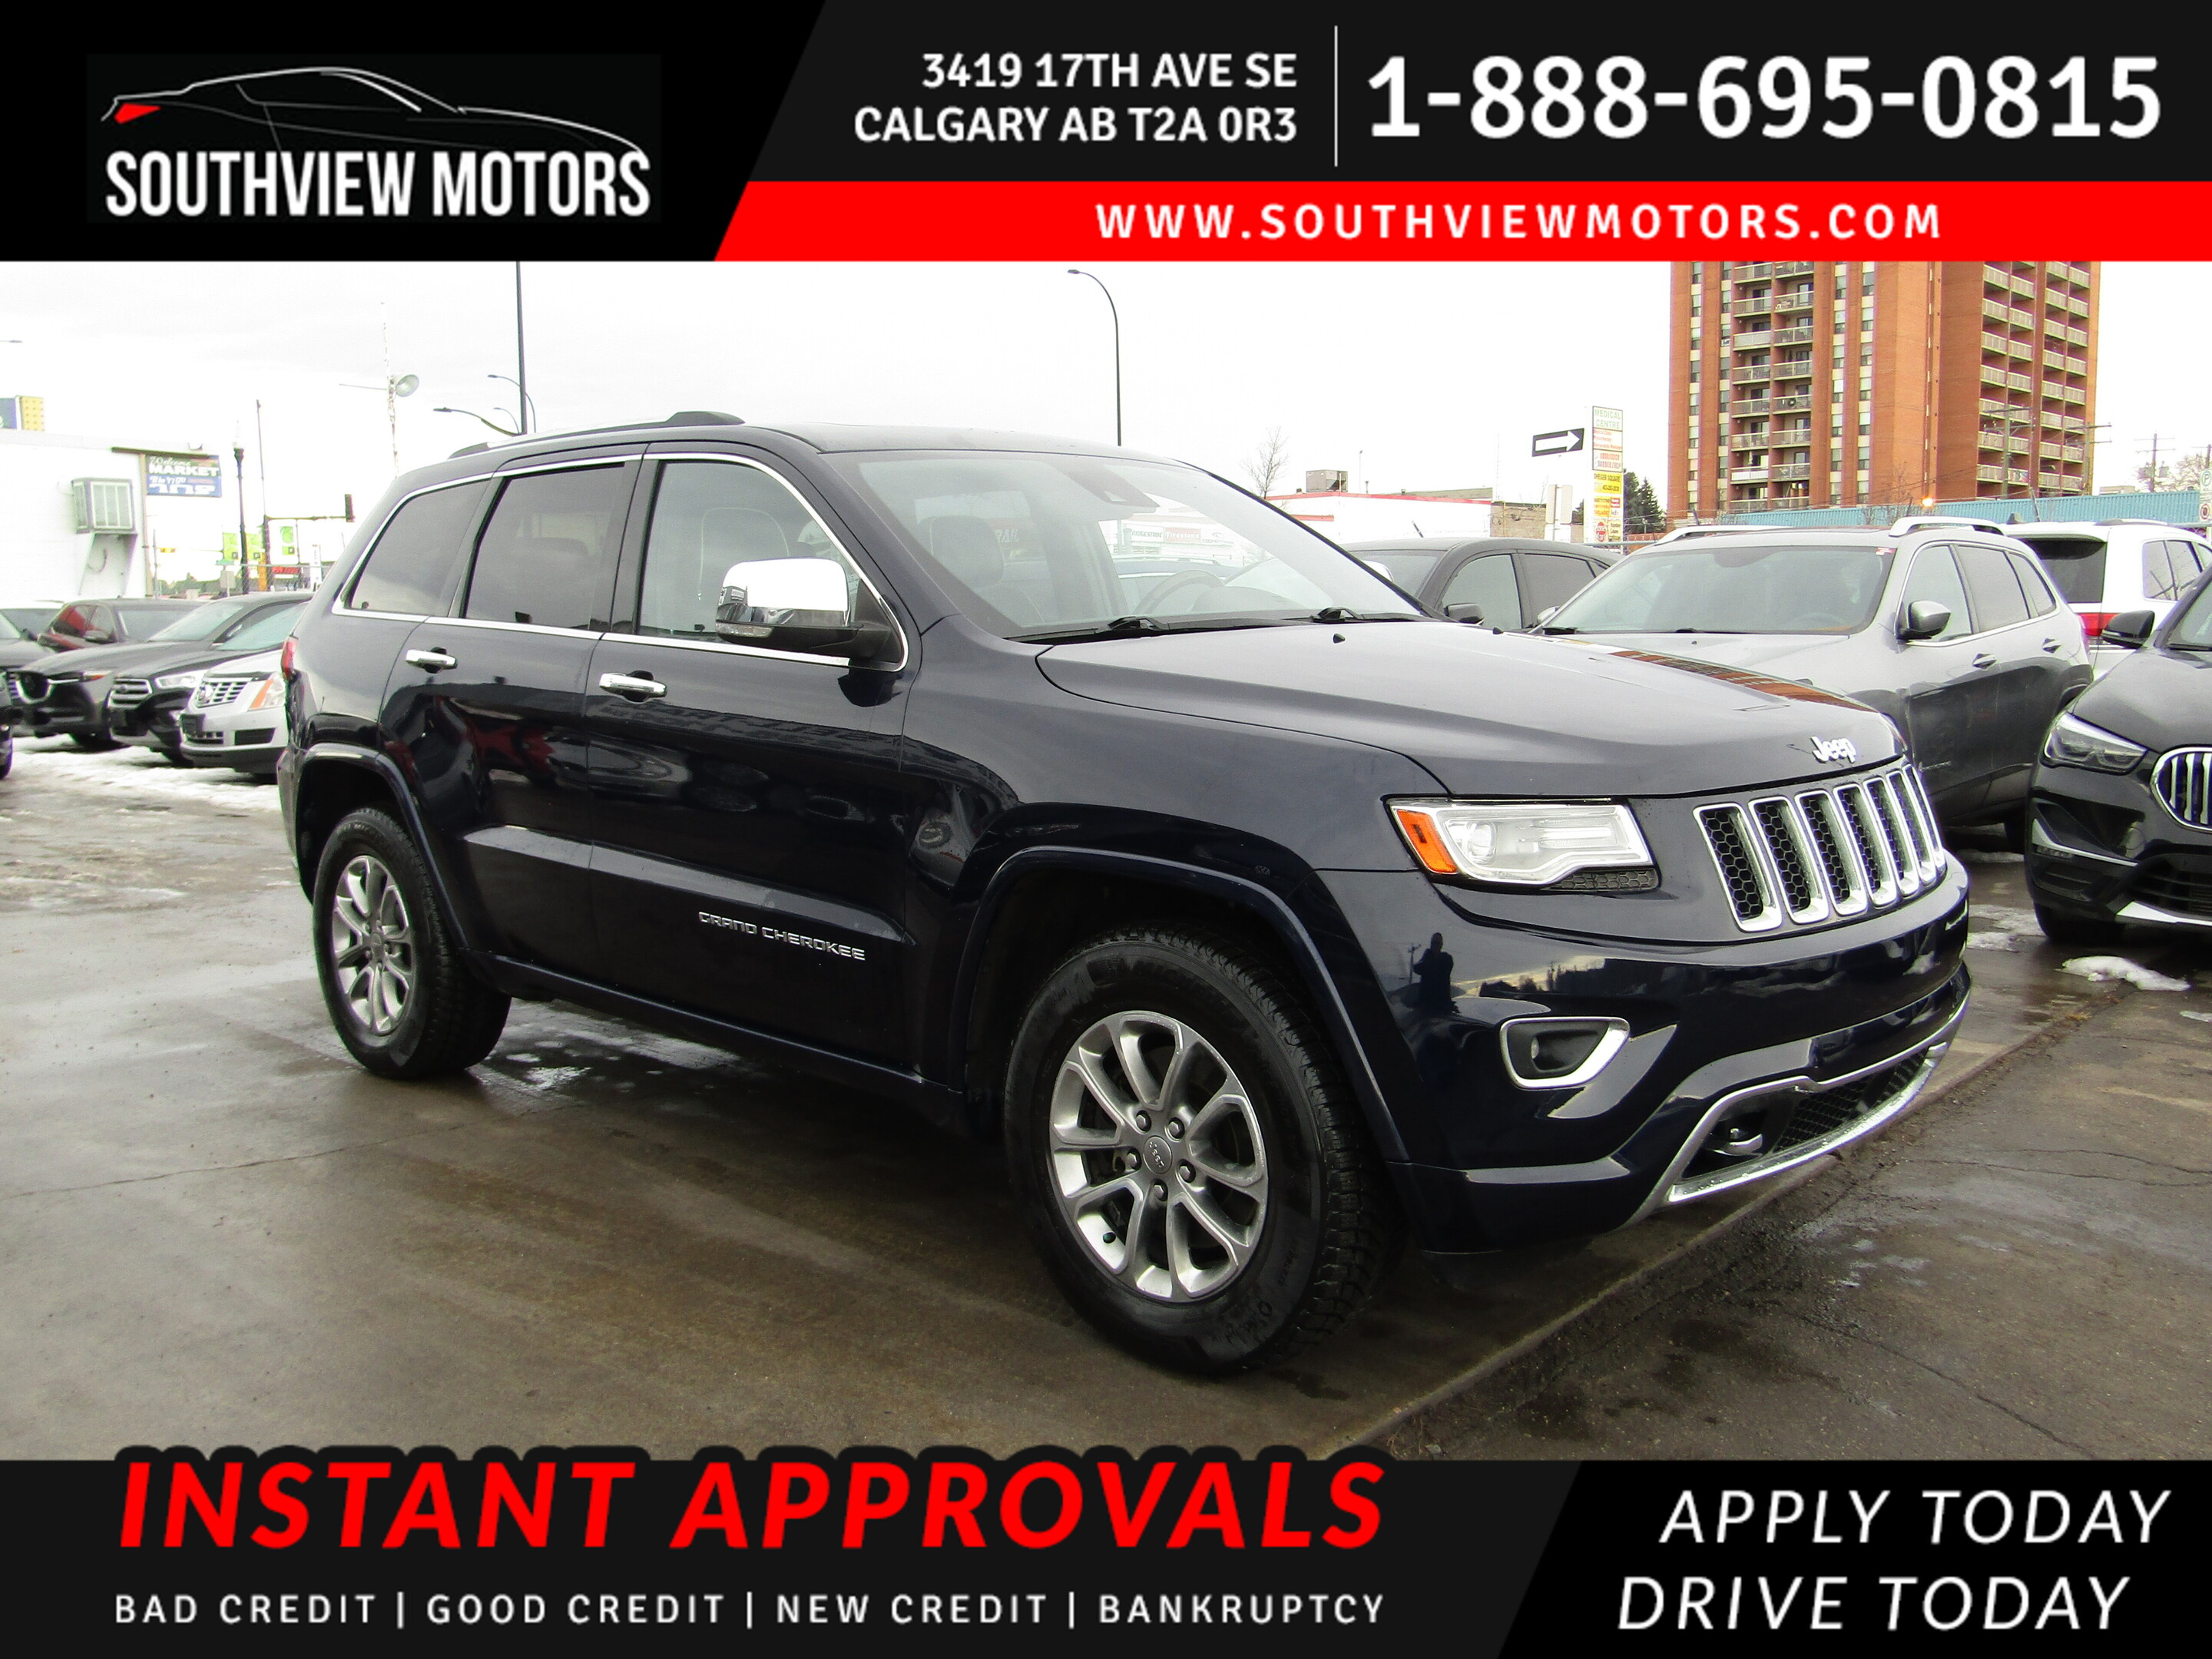 2014 Jeep Grand Cherokee OVERLAND 4WD 3.0L DIESEL B.S.A/NAV/CAM/PANOROOF